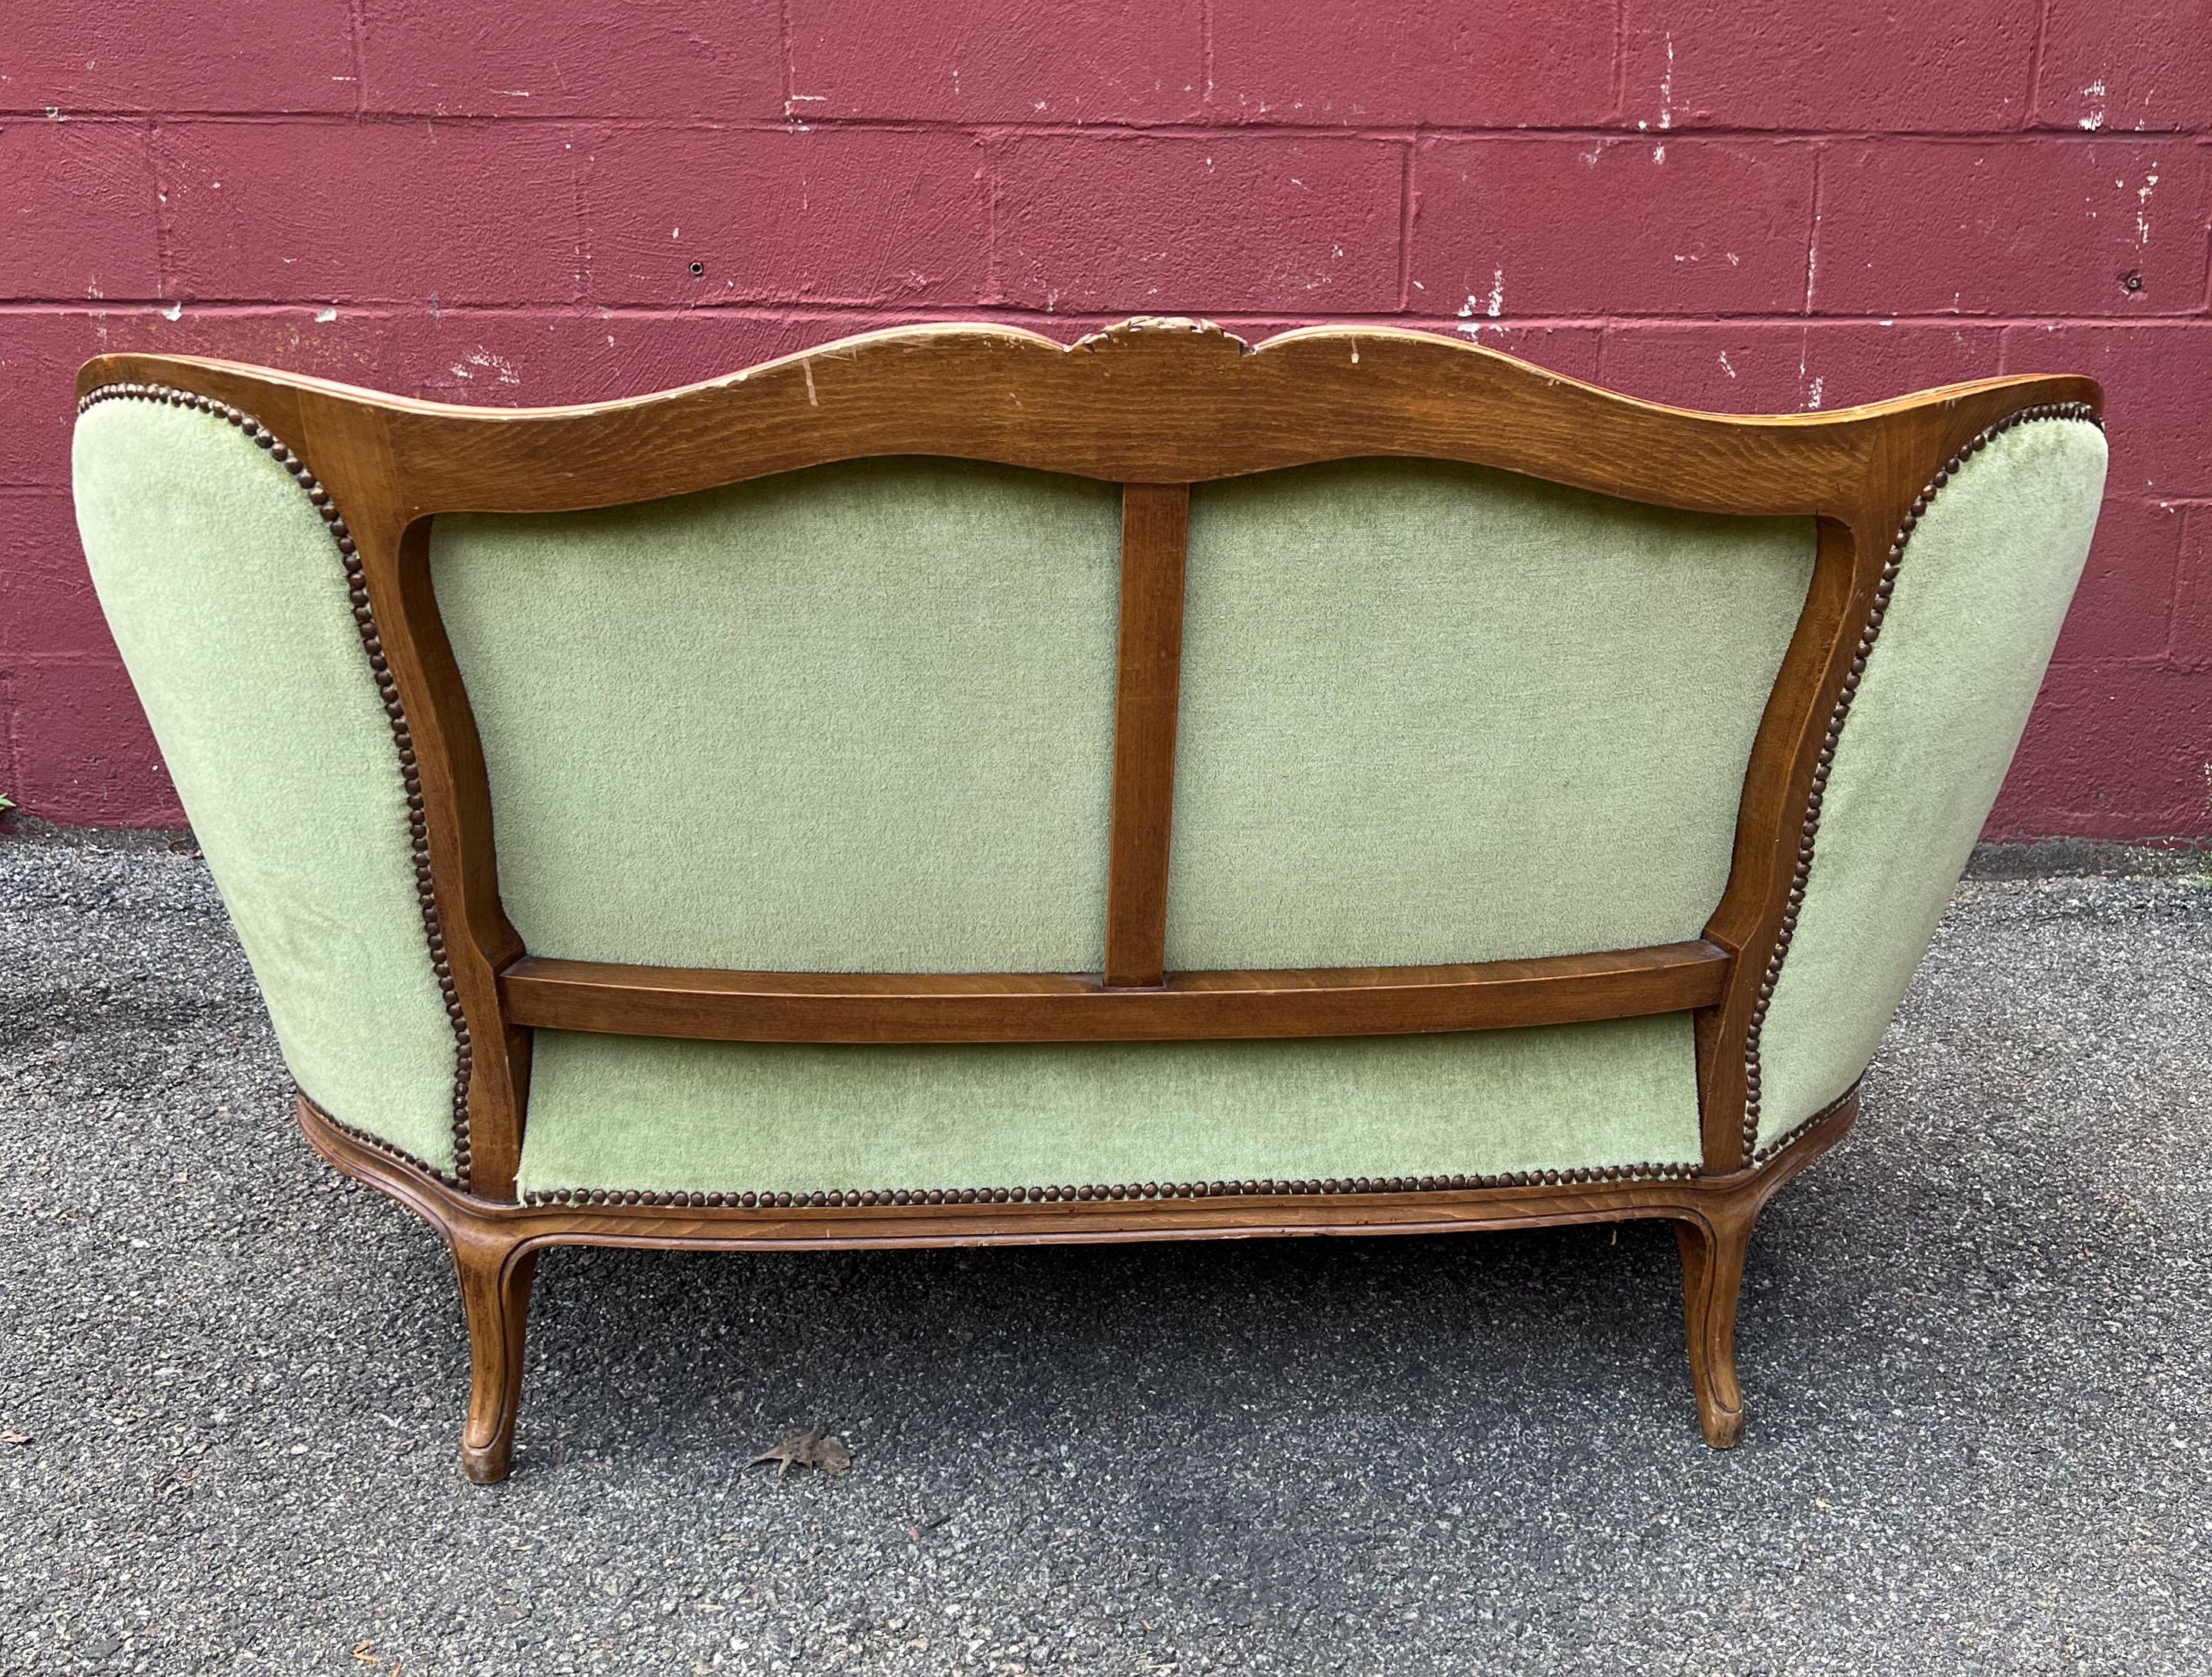 Fruitwood Small Louis XV Style Sette and Matching Pair of Armchairs in Green Velvet